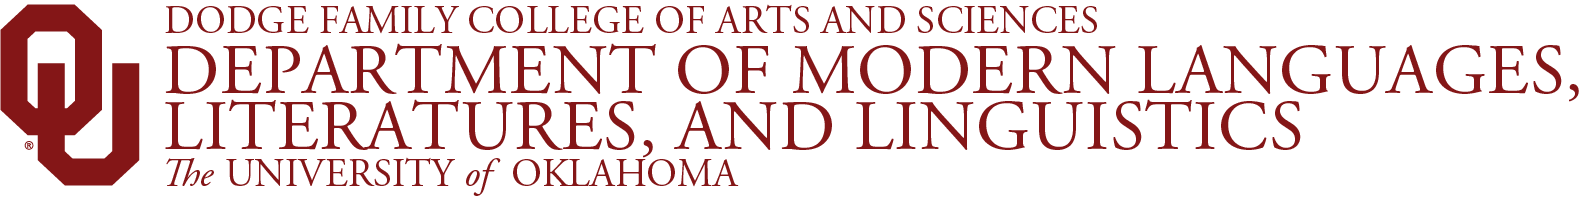 OU Dodge Family College of Arts and Sciences, Department of Modern Languages, Literatures, and Linguistics, The University of Oklahoma wordmark